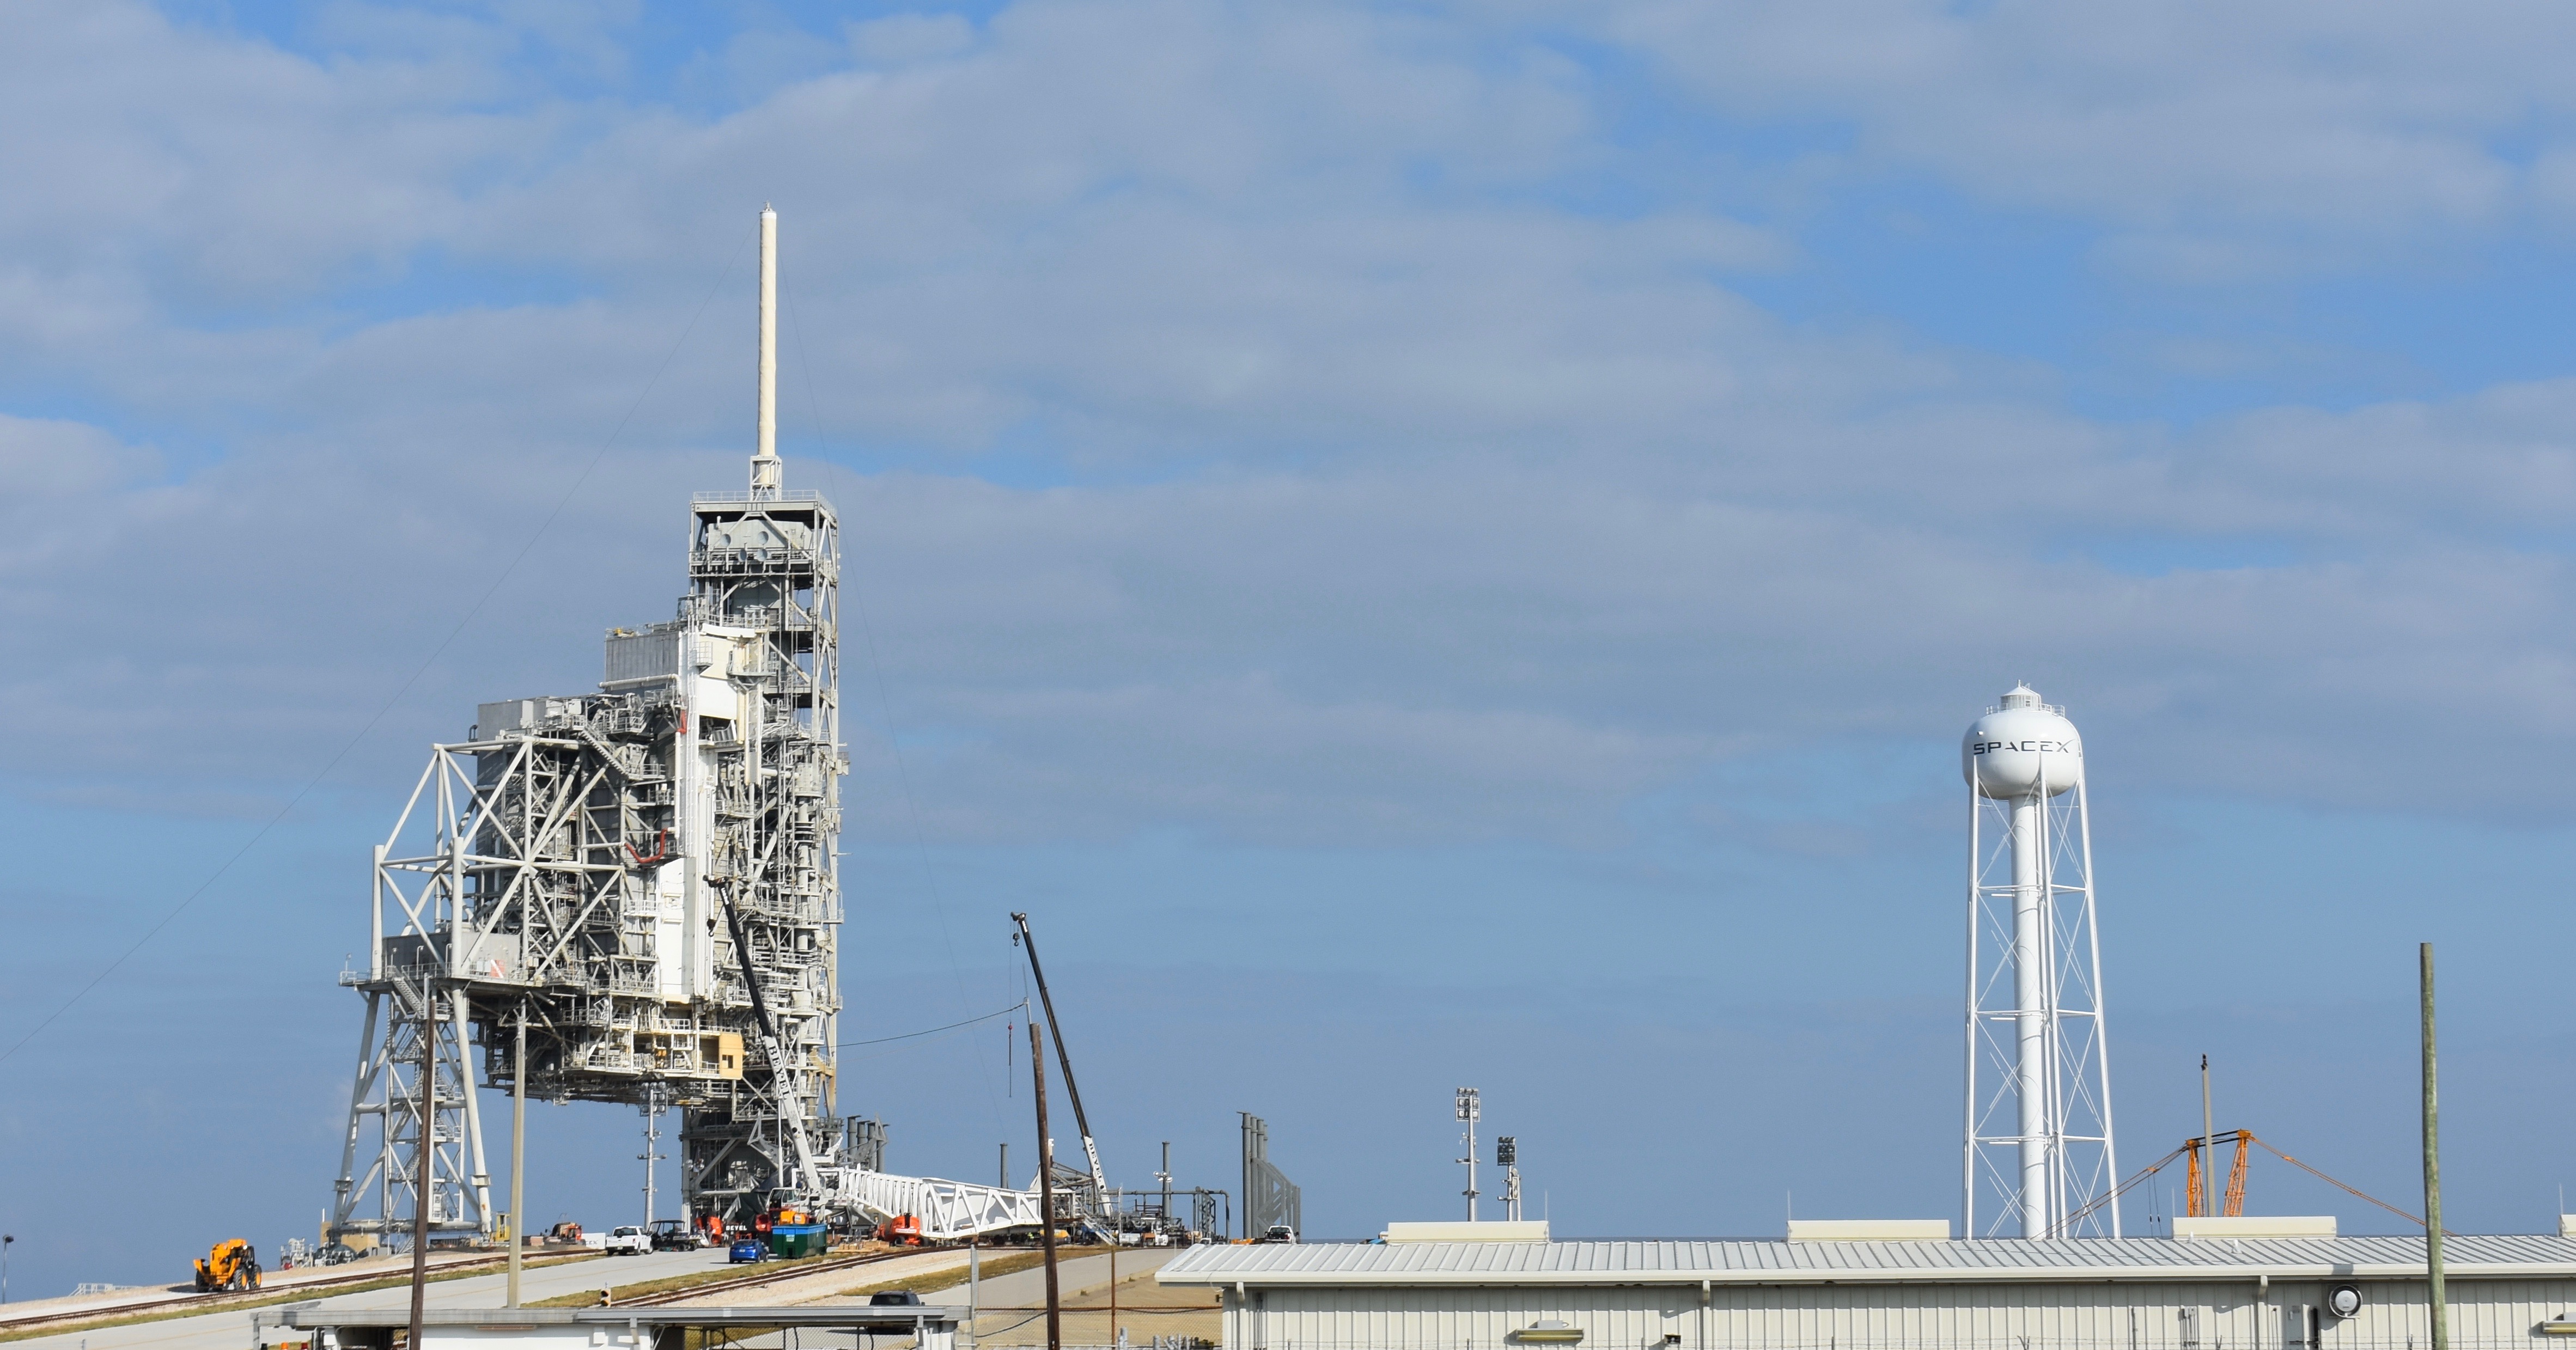 SpaceX Launch Complex 39A at Kennedy Space Center.